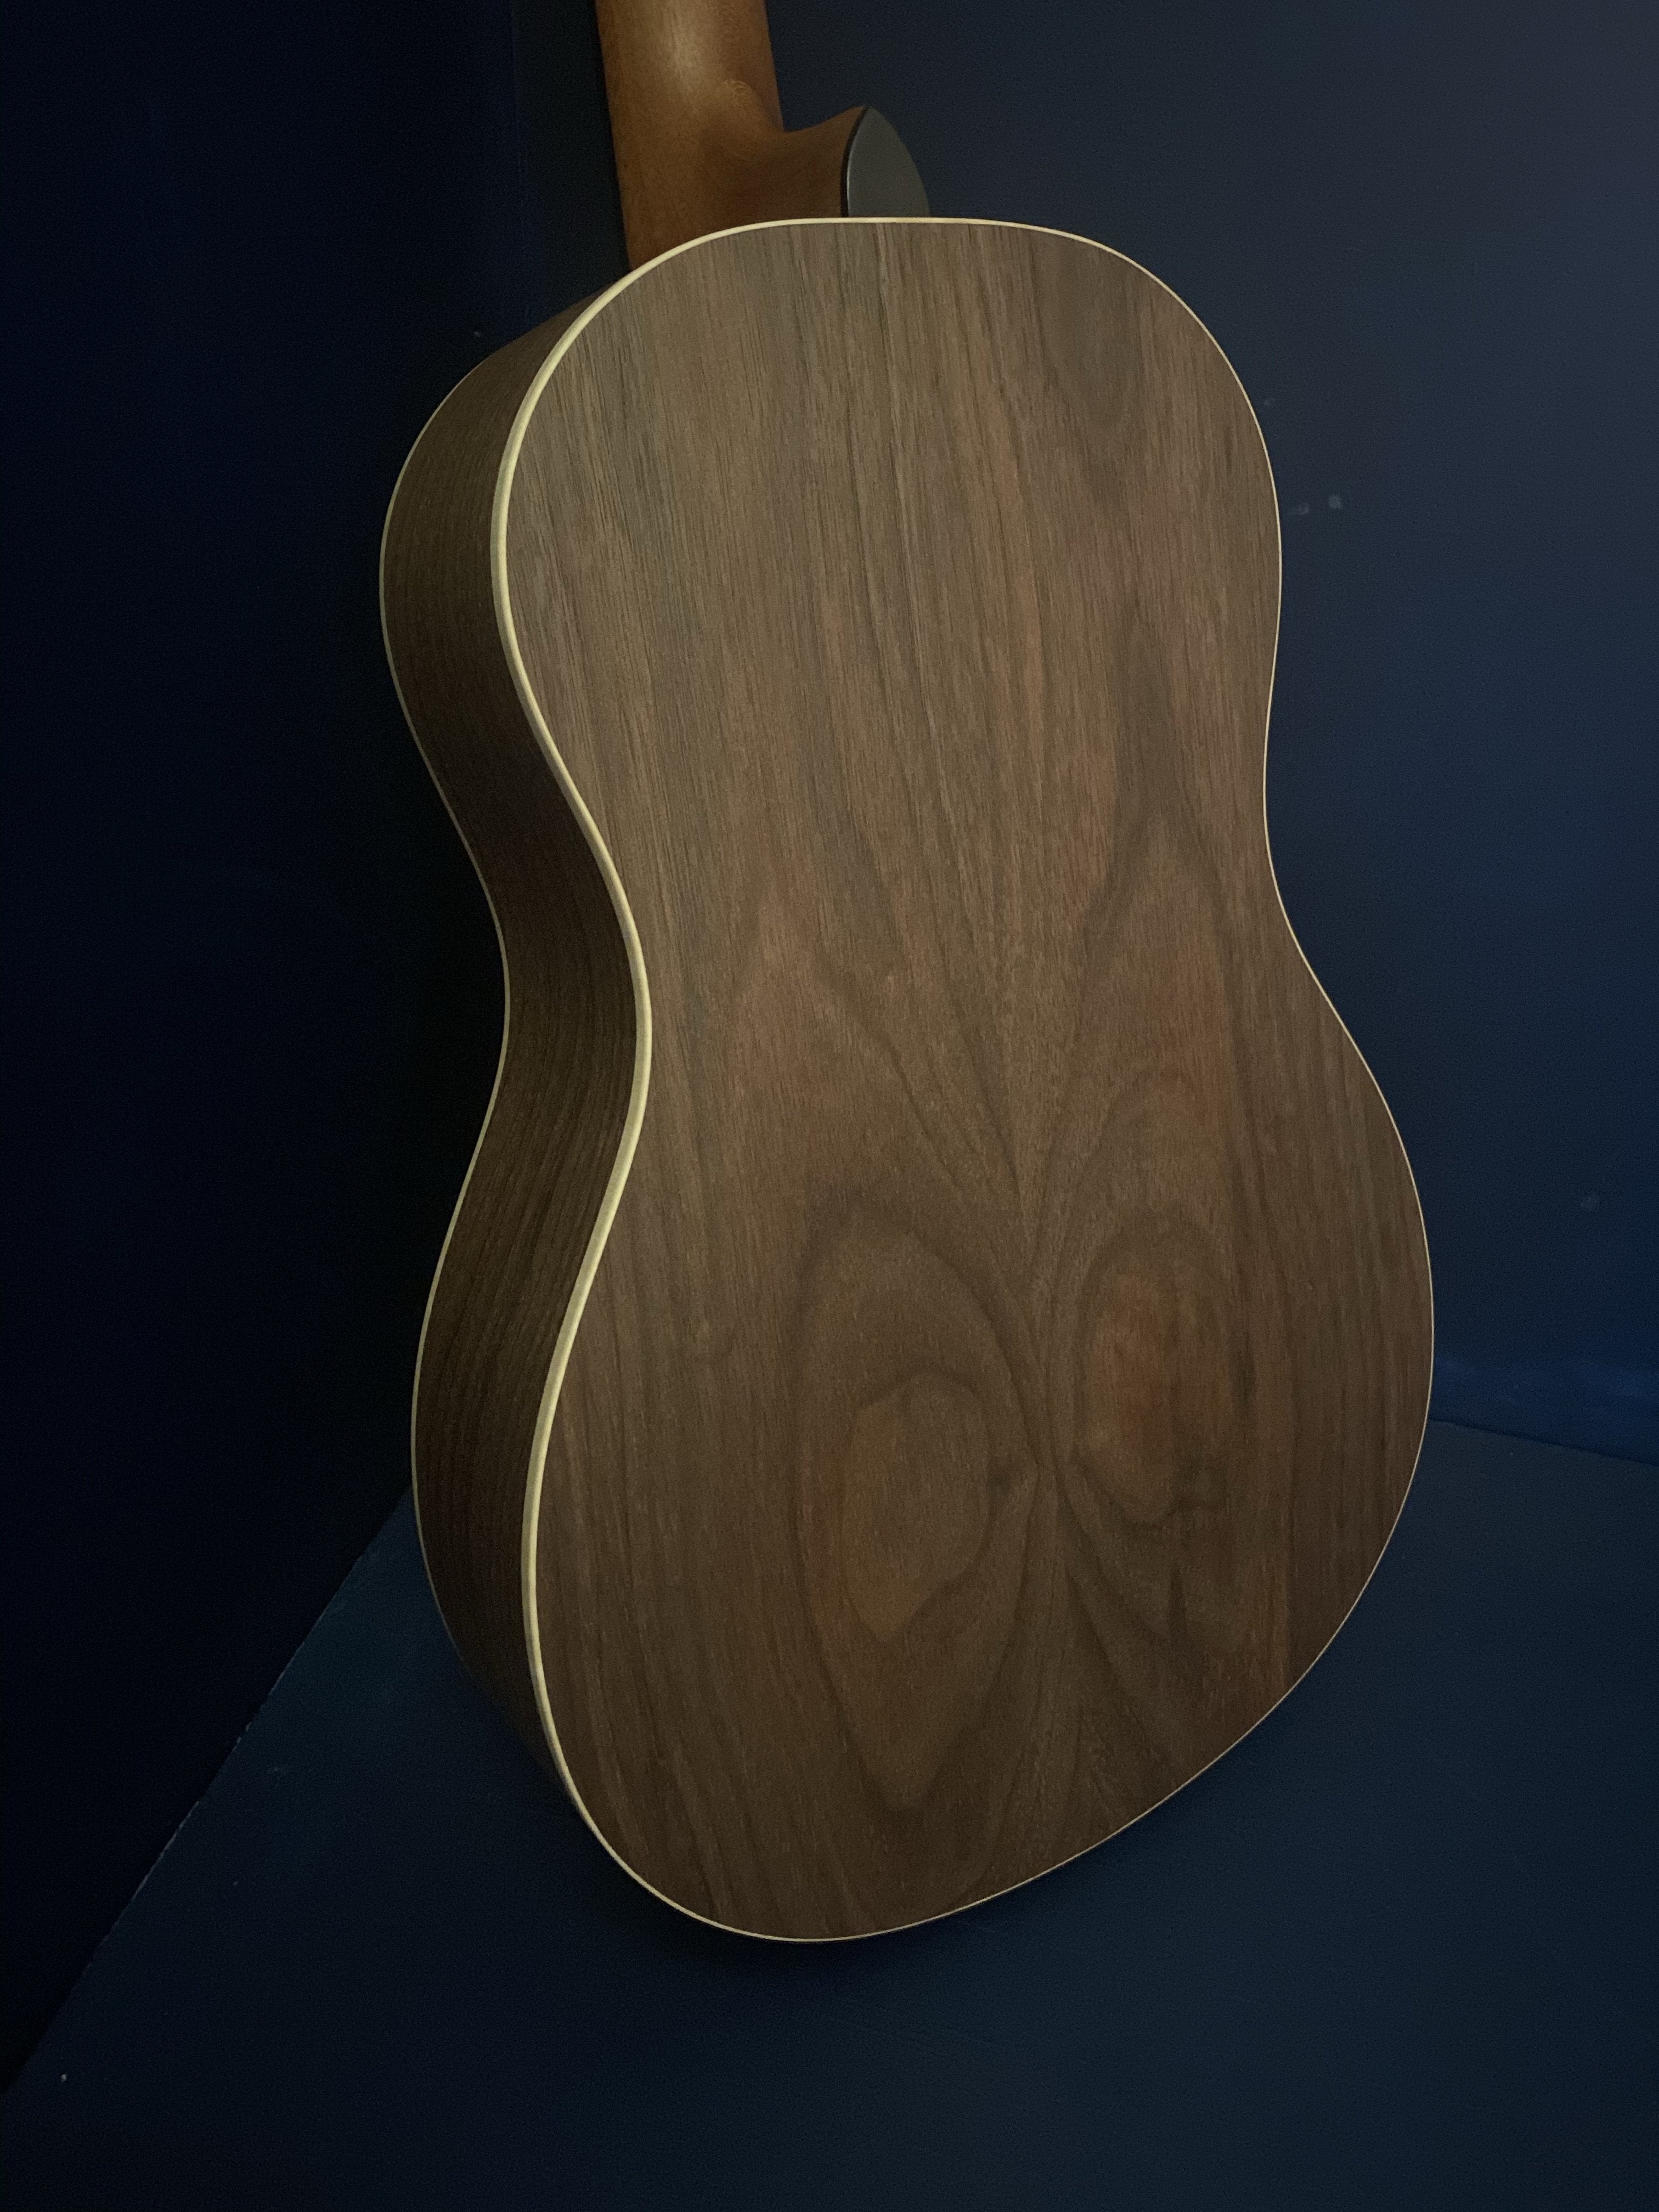 Dowina Walnut Tribute Deluxe BV, Acoustic Guitar for sale at Richards Guitars.